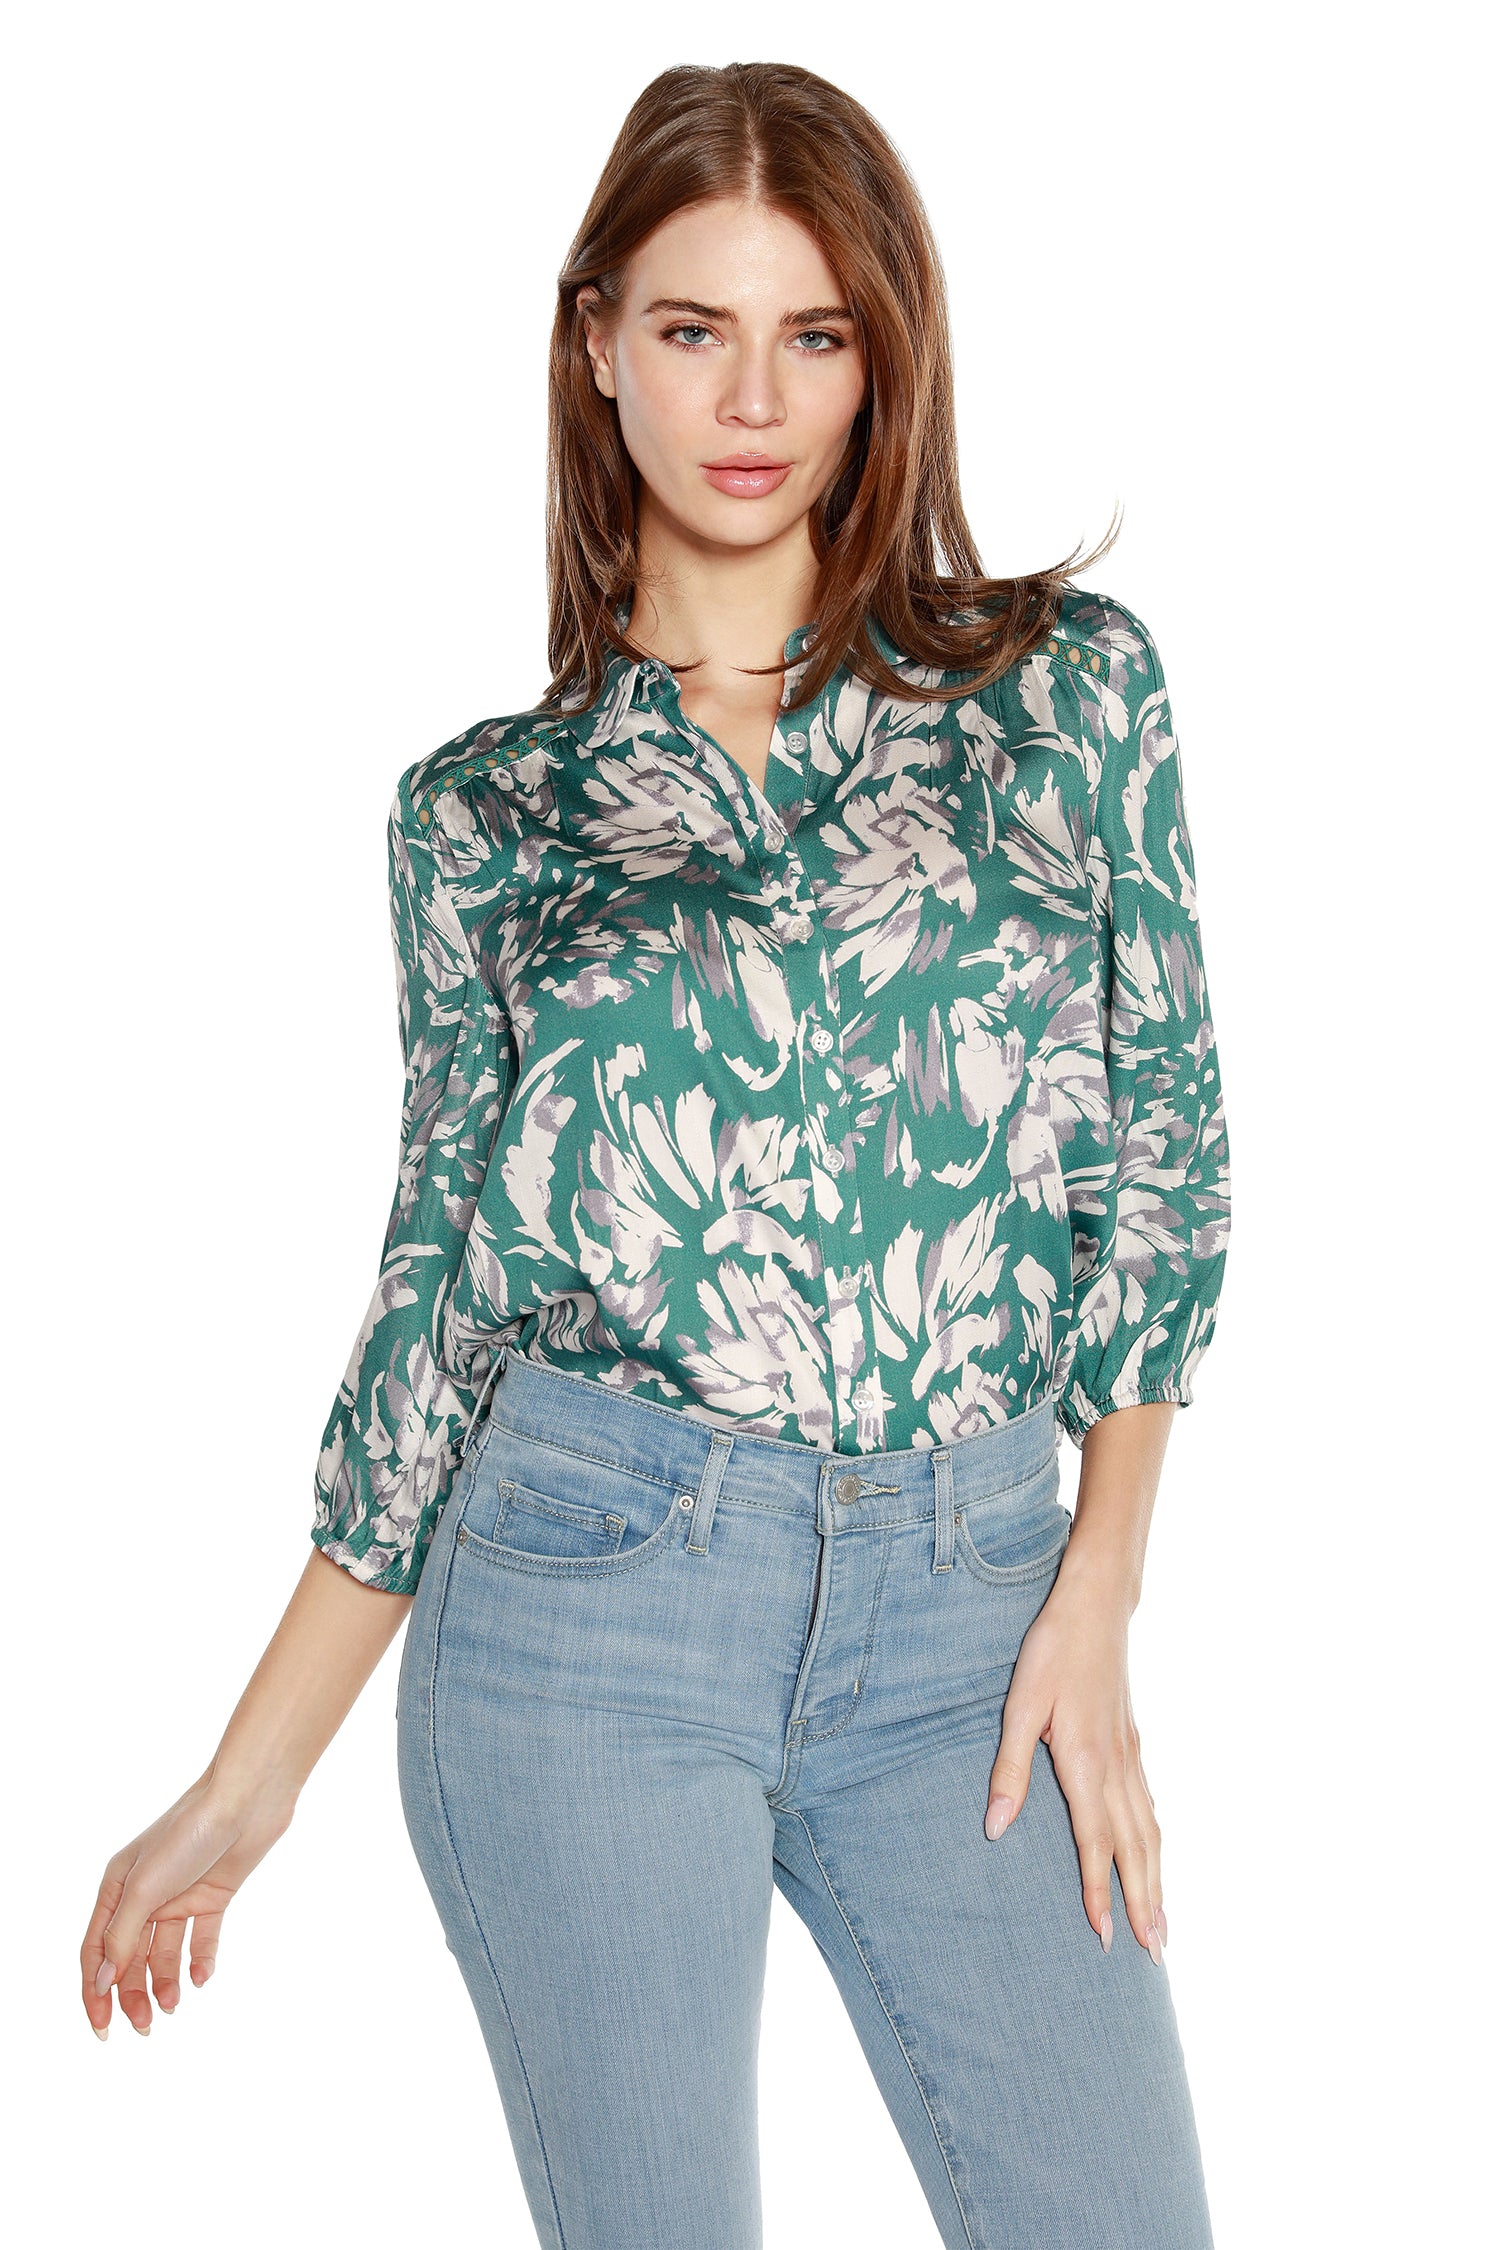 Women’s Floral Button Up Blouse with Collar and 3/4 Sleeves